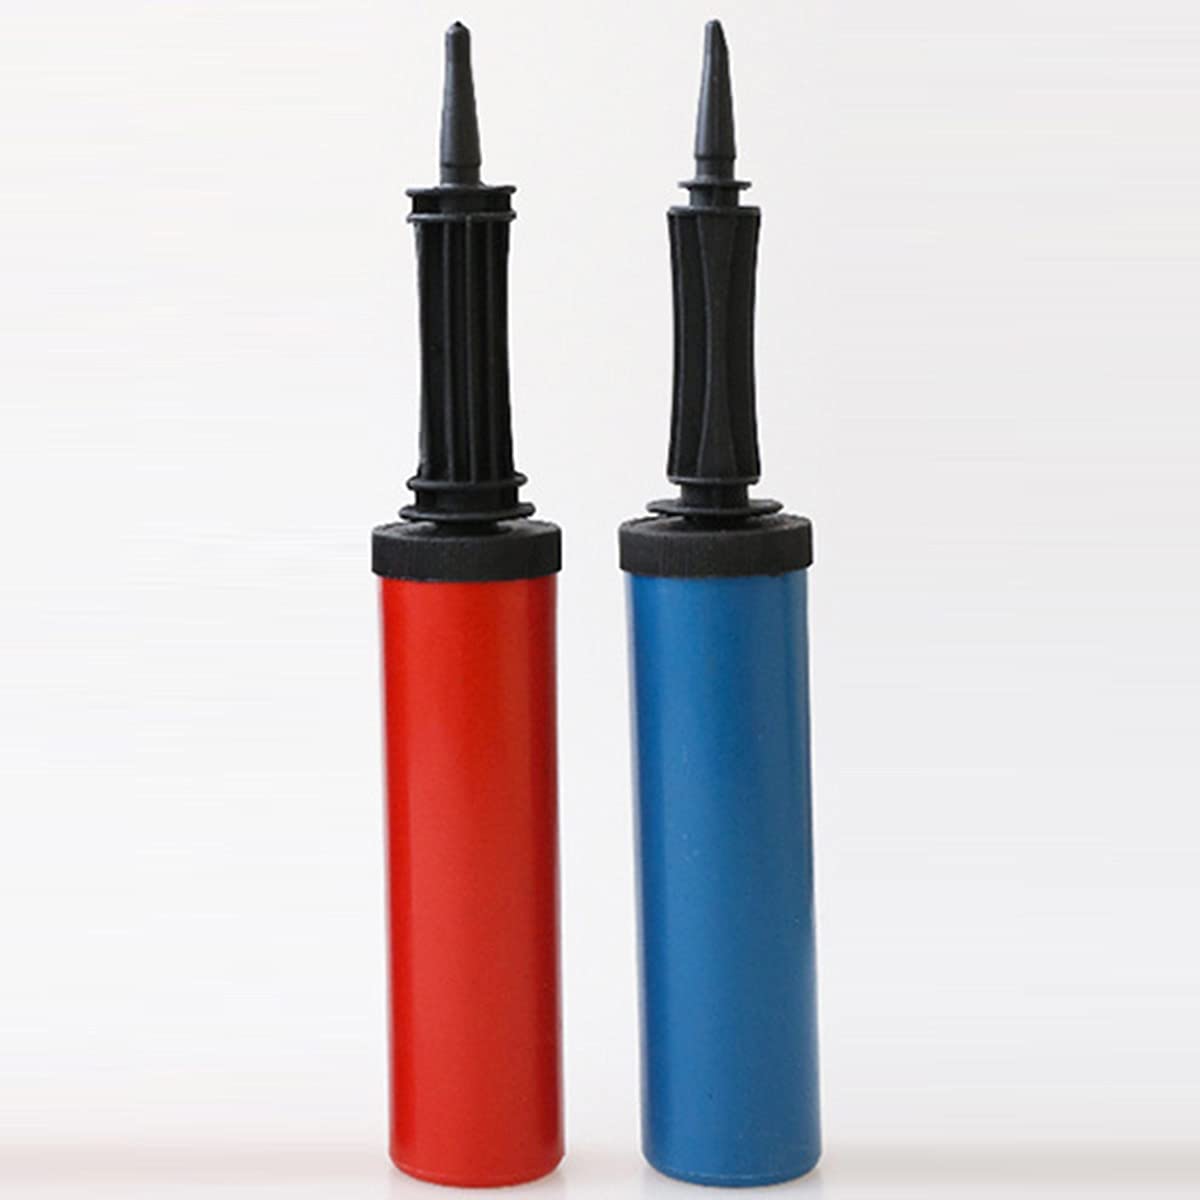 ... 2pk Balloon Pumps by Jaunty PartywareManual Pump Canister 